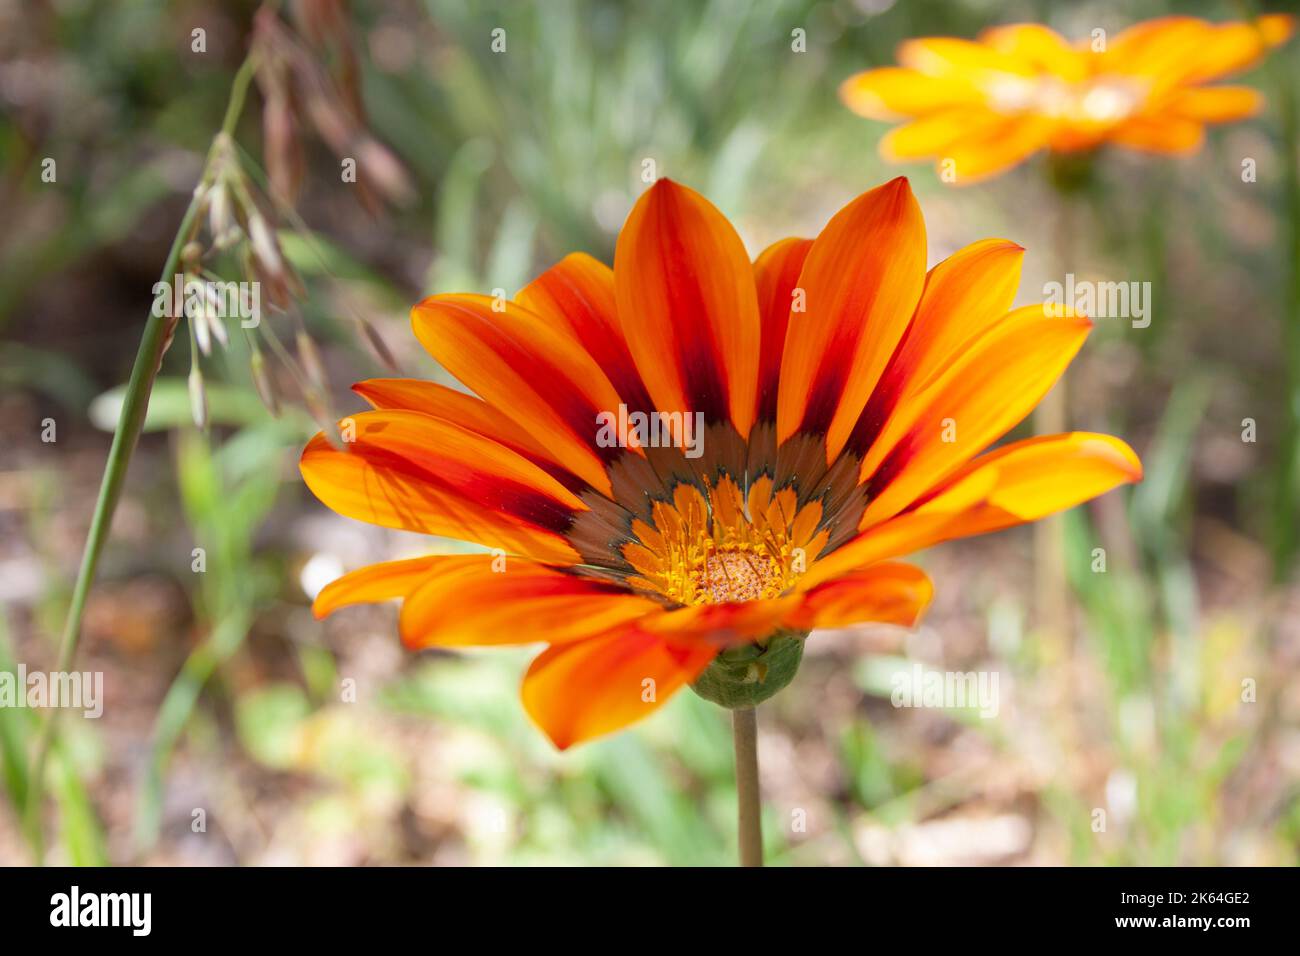 Gazania Linearis also known as the Striped Treasure Flower. Paarl Rock, South Africa Stock Photo